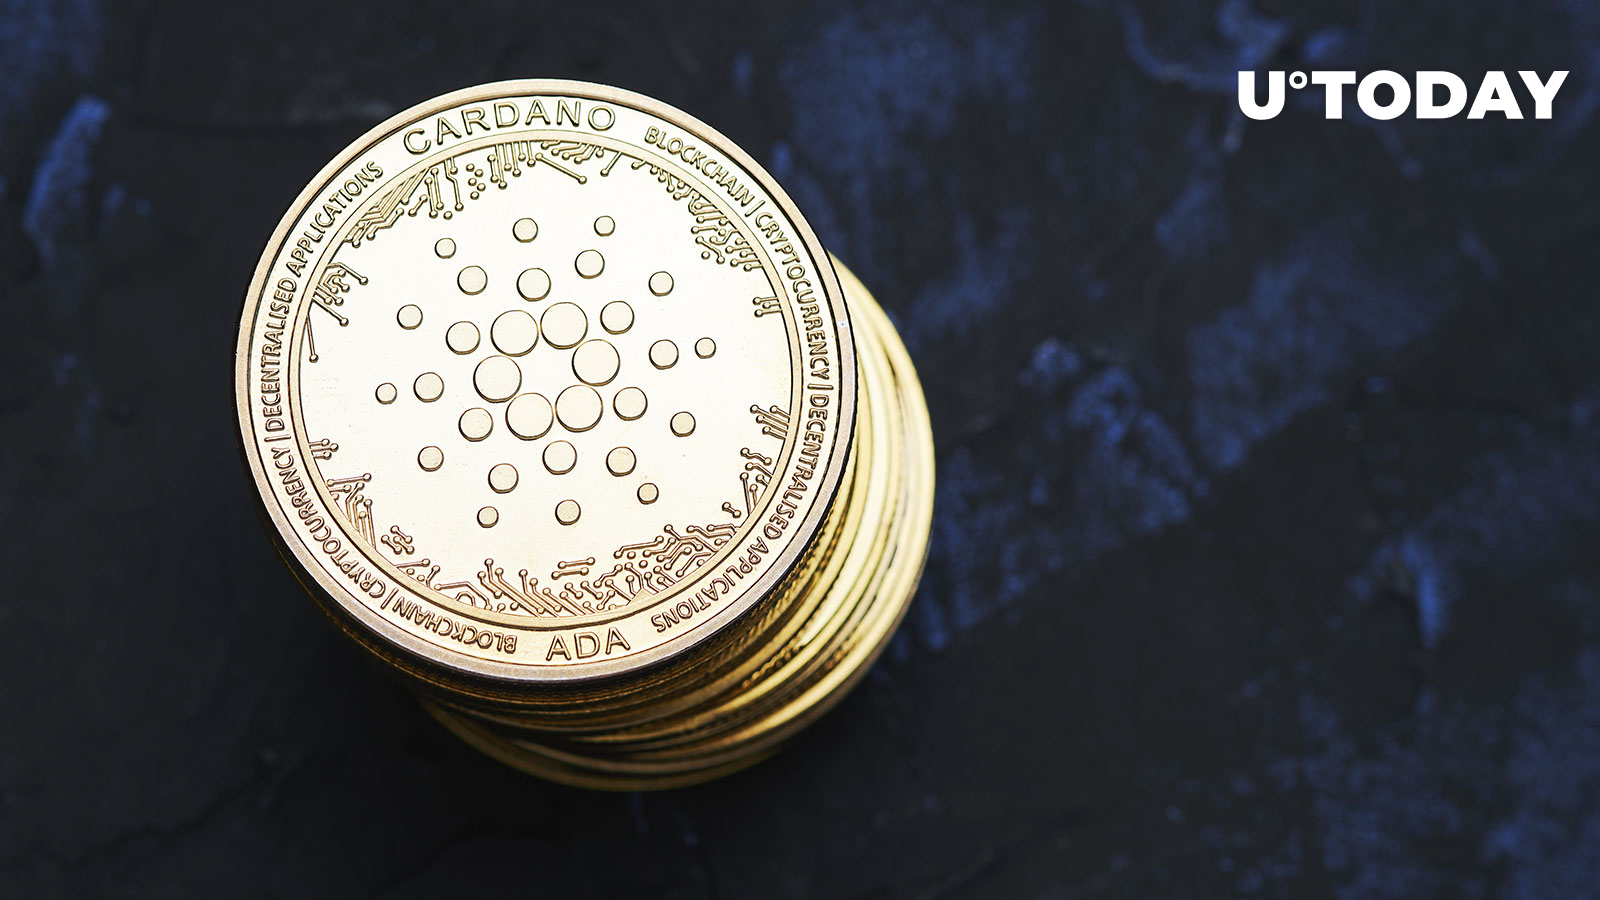 Cardano-Based Algorithmic Stablecoin “Pretty Close,” COTI Founder Says